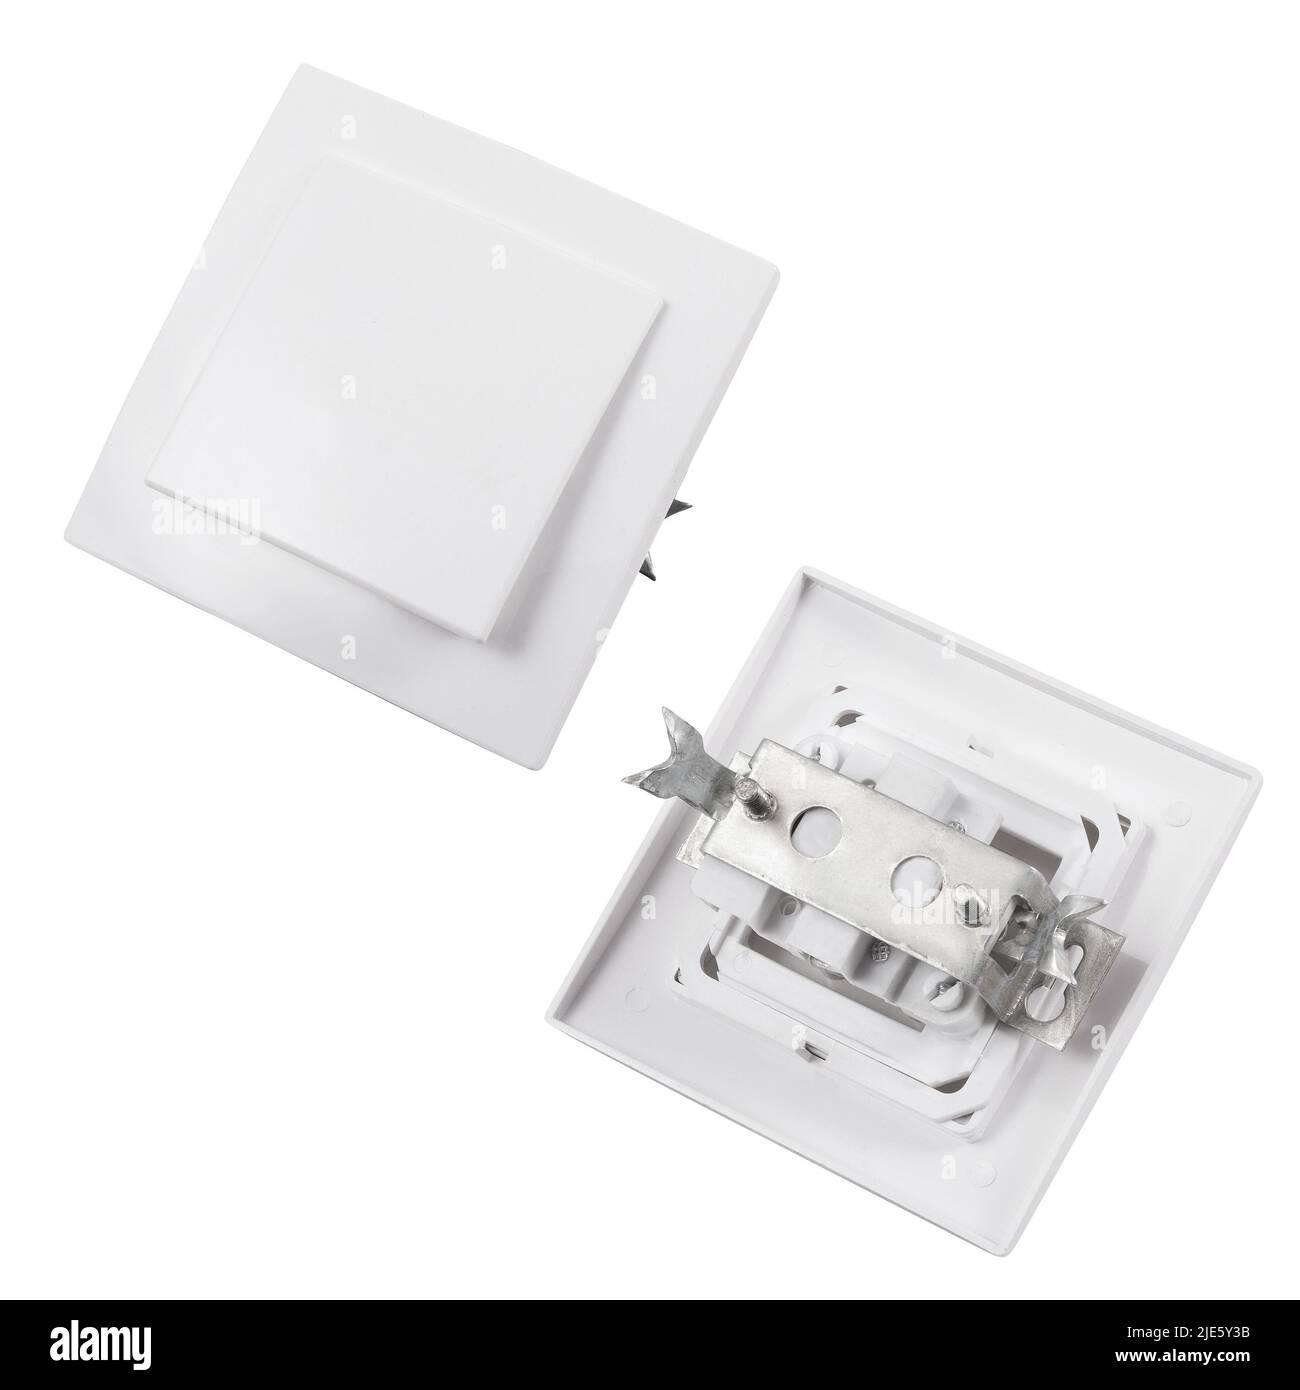 Built-in light switch with 1 key isolated on a white background. Photograph of the switch front and back. Stock Photo